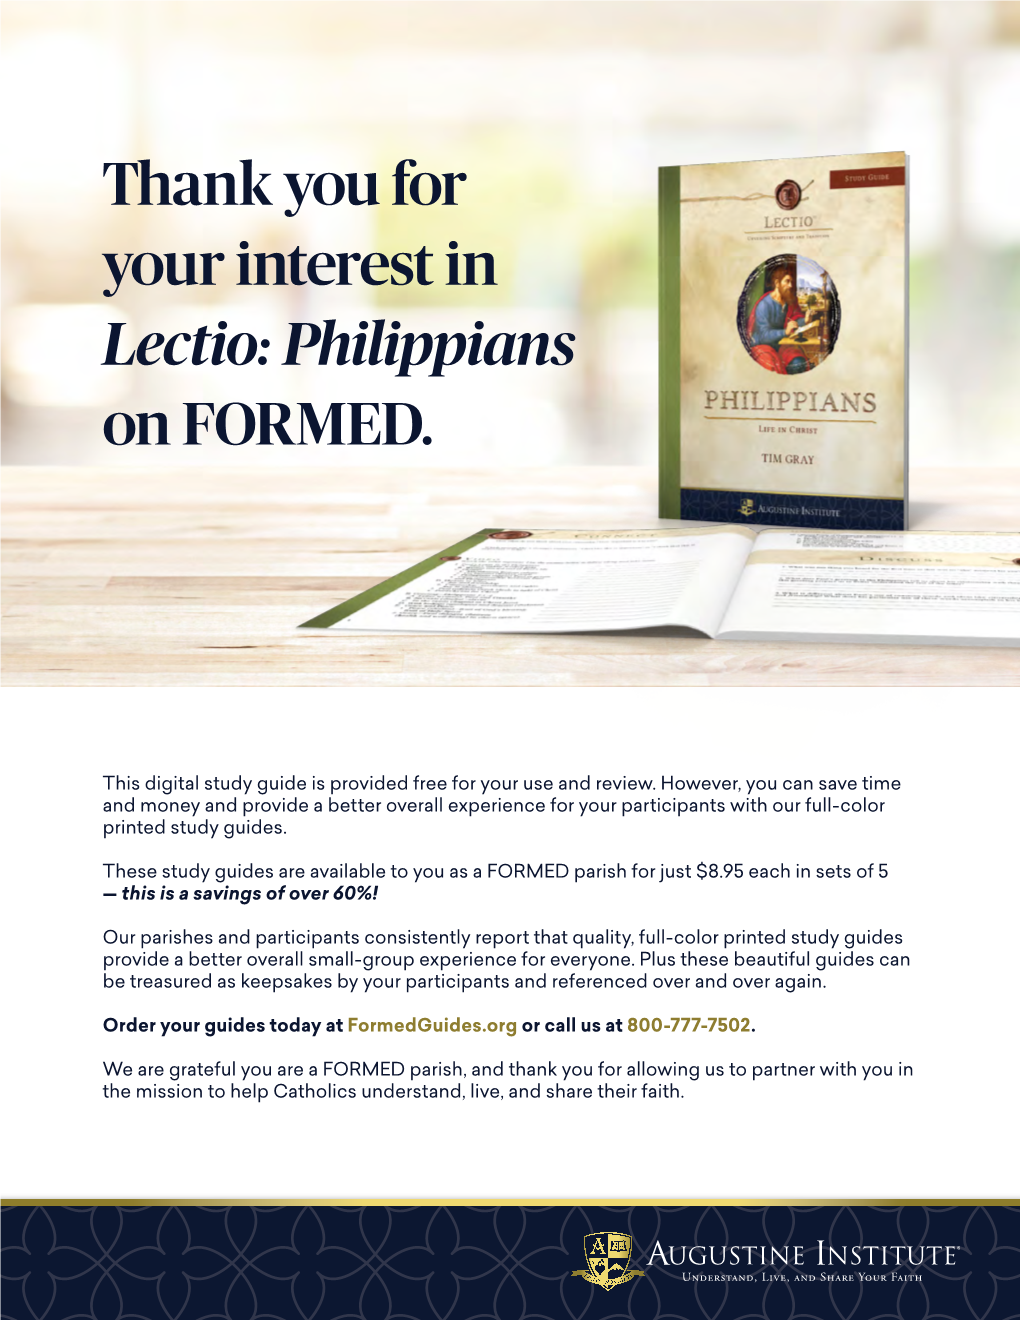 Thank You for Your Interest in Lectio: Philippians on FORMED